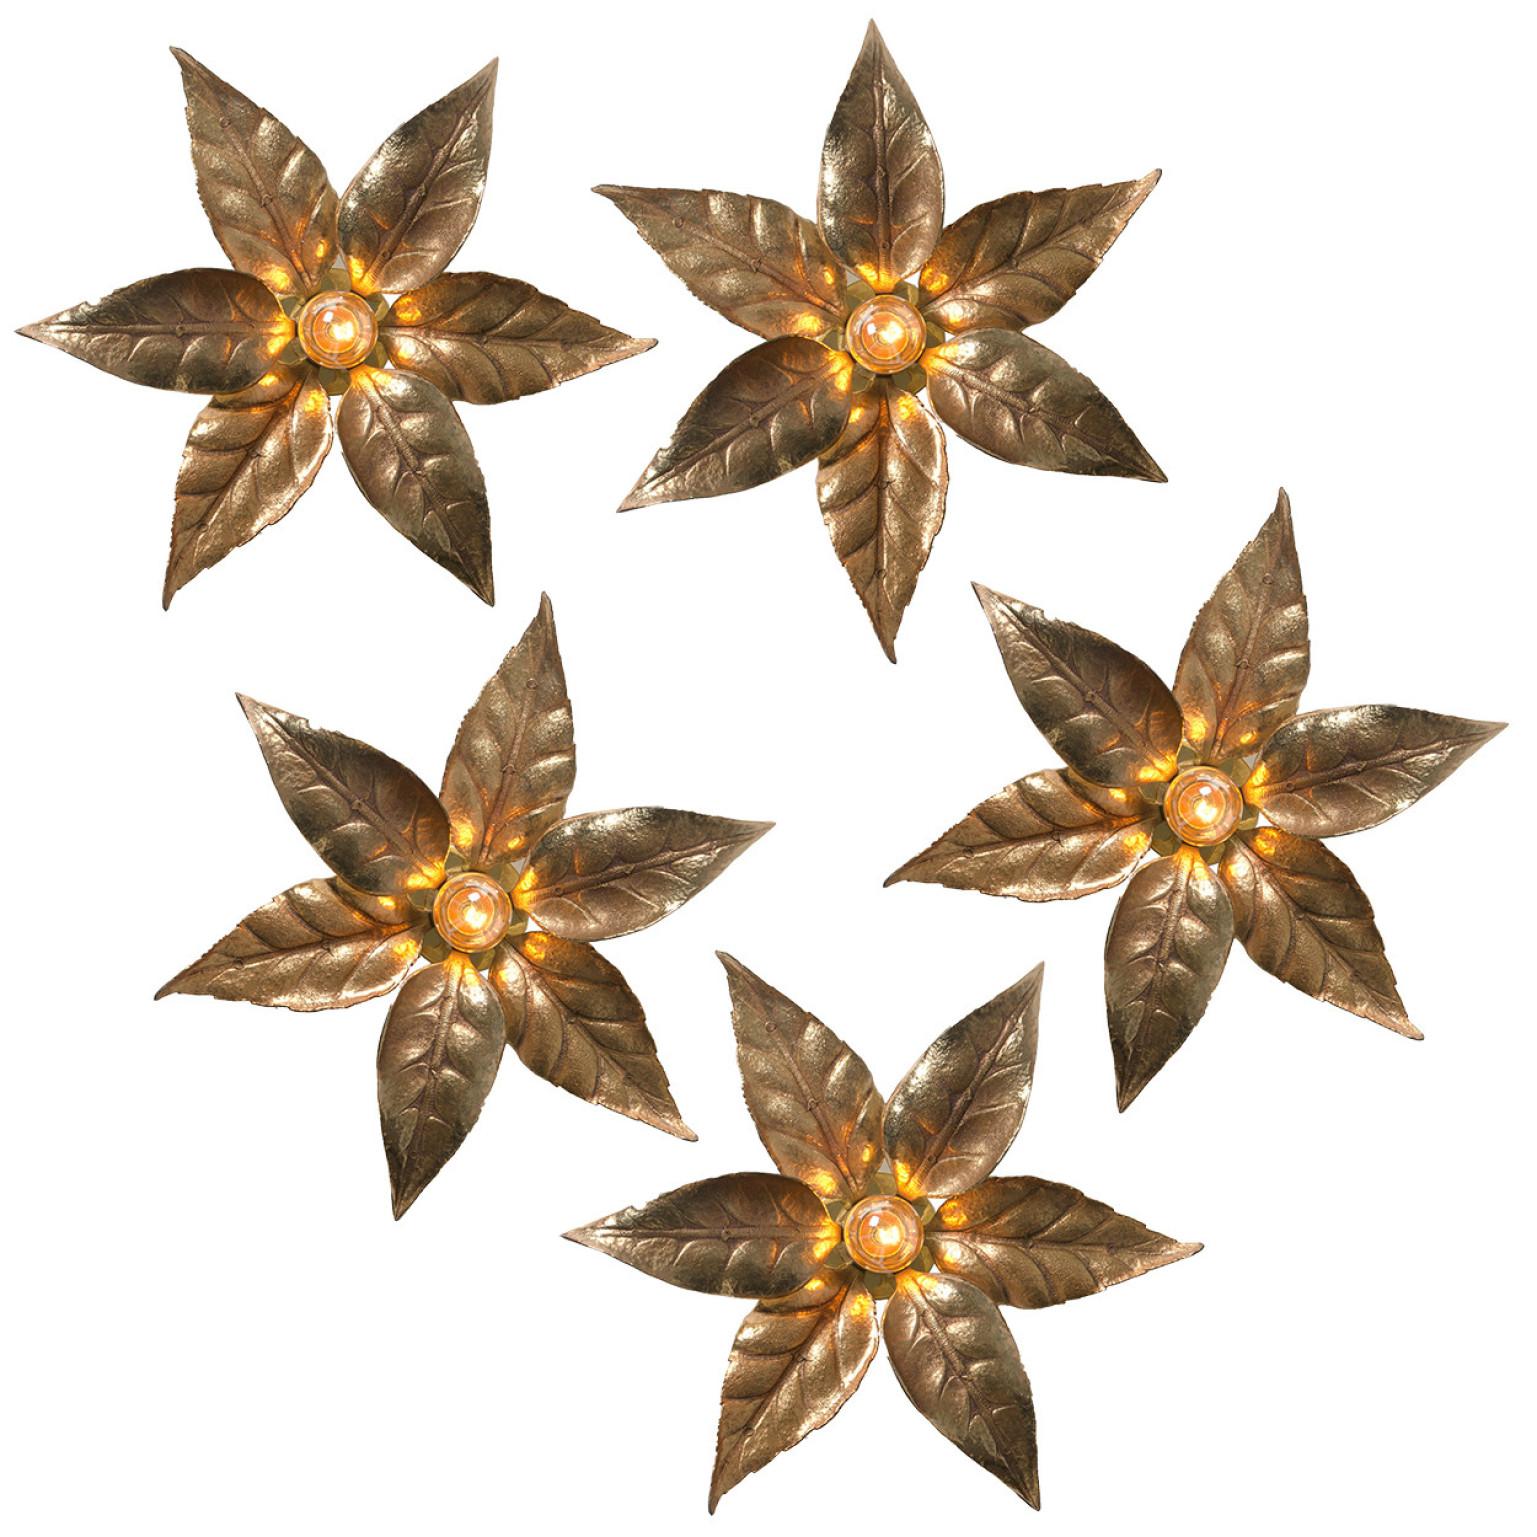 1 of the 6 brass flowers wall lights in the style of designer Willy Daro manufactured by 'Massive Lighting', circa 1970s, Belgium. This decorative and beautiful large sculptural light consists brass-plated flowers on a circular base of the same